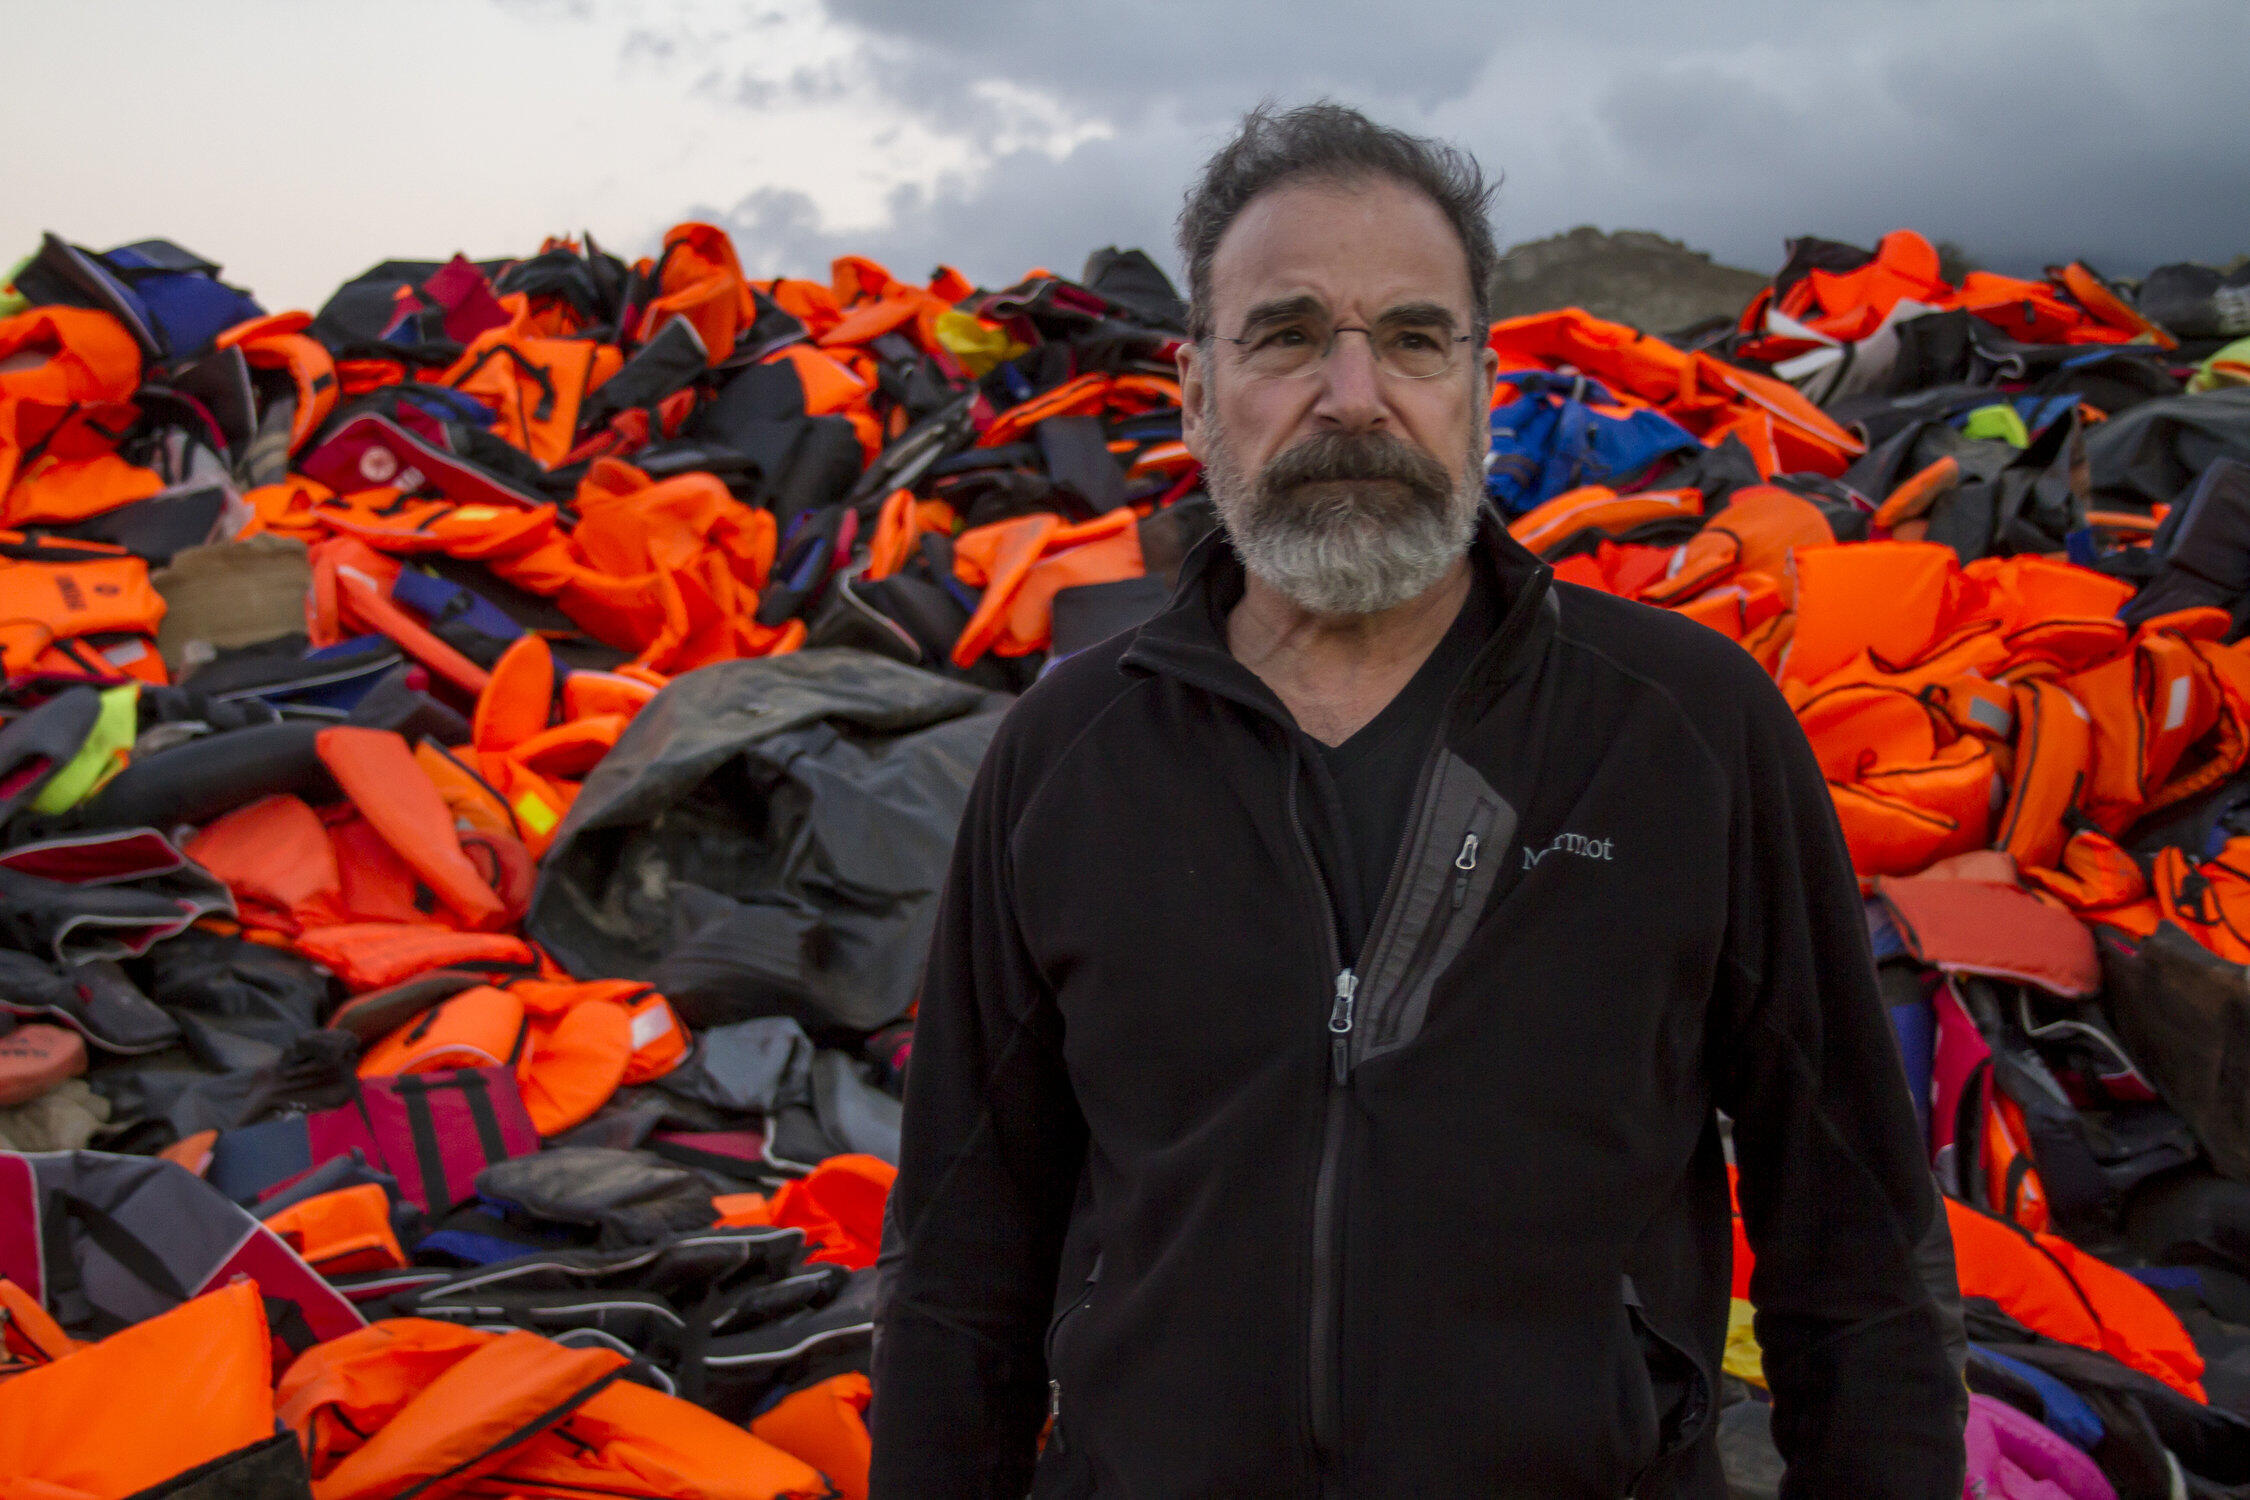 Mandy Patinkin on the island of Lesbos, Greece with lifejackets used by refugee